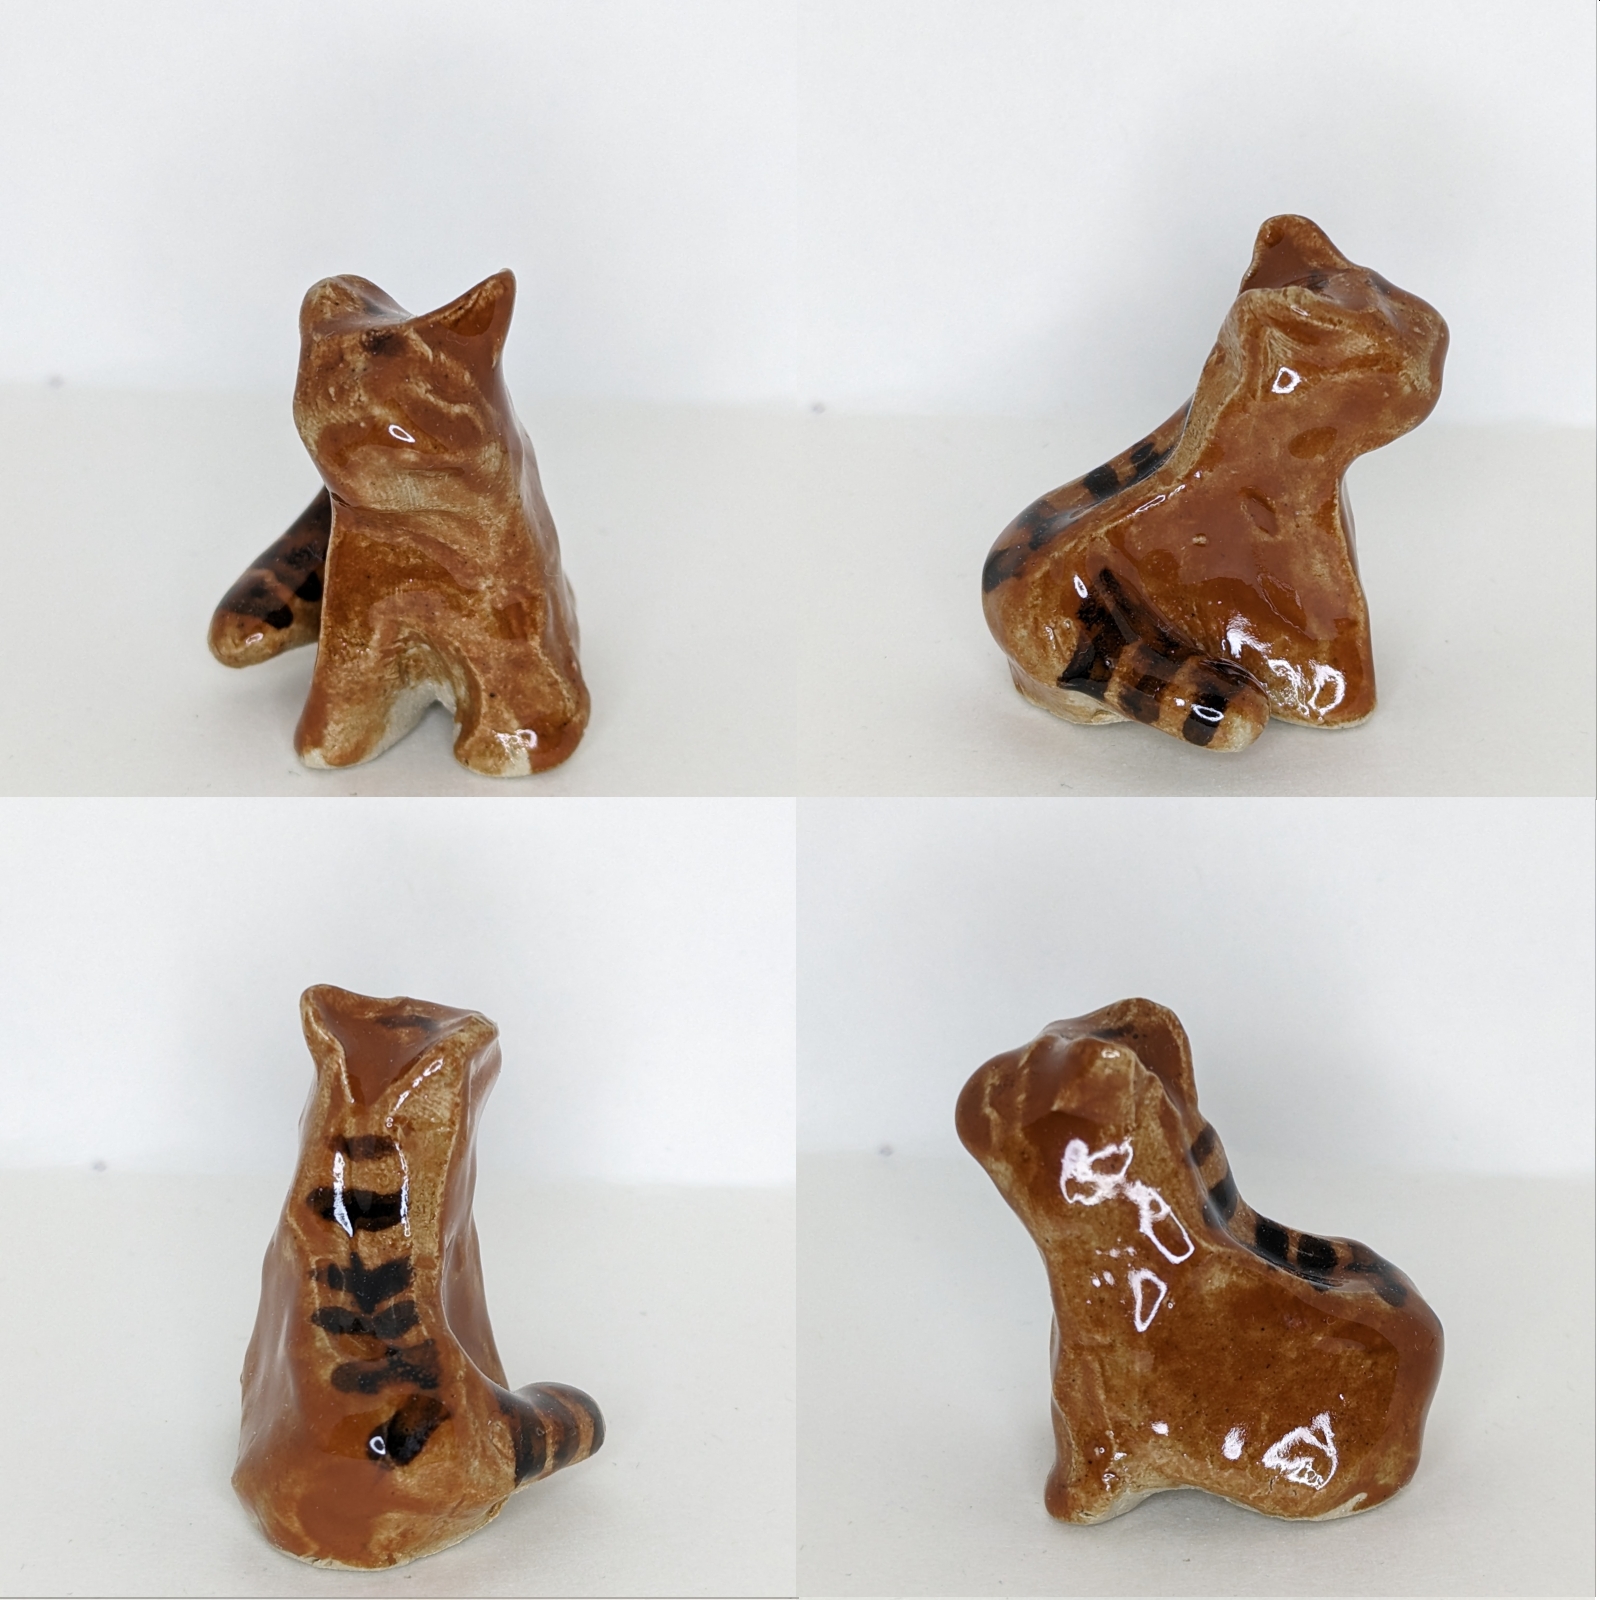 4 views of a ceramic cat in a sitting pose. It is brown with stripes.